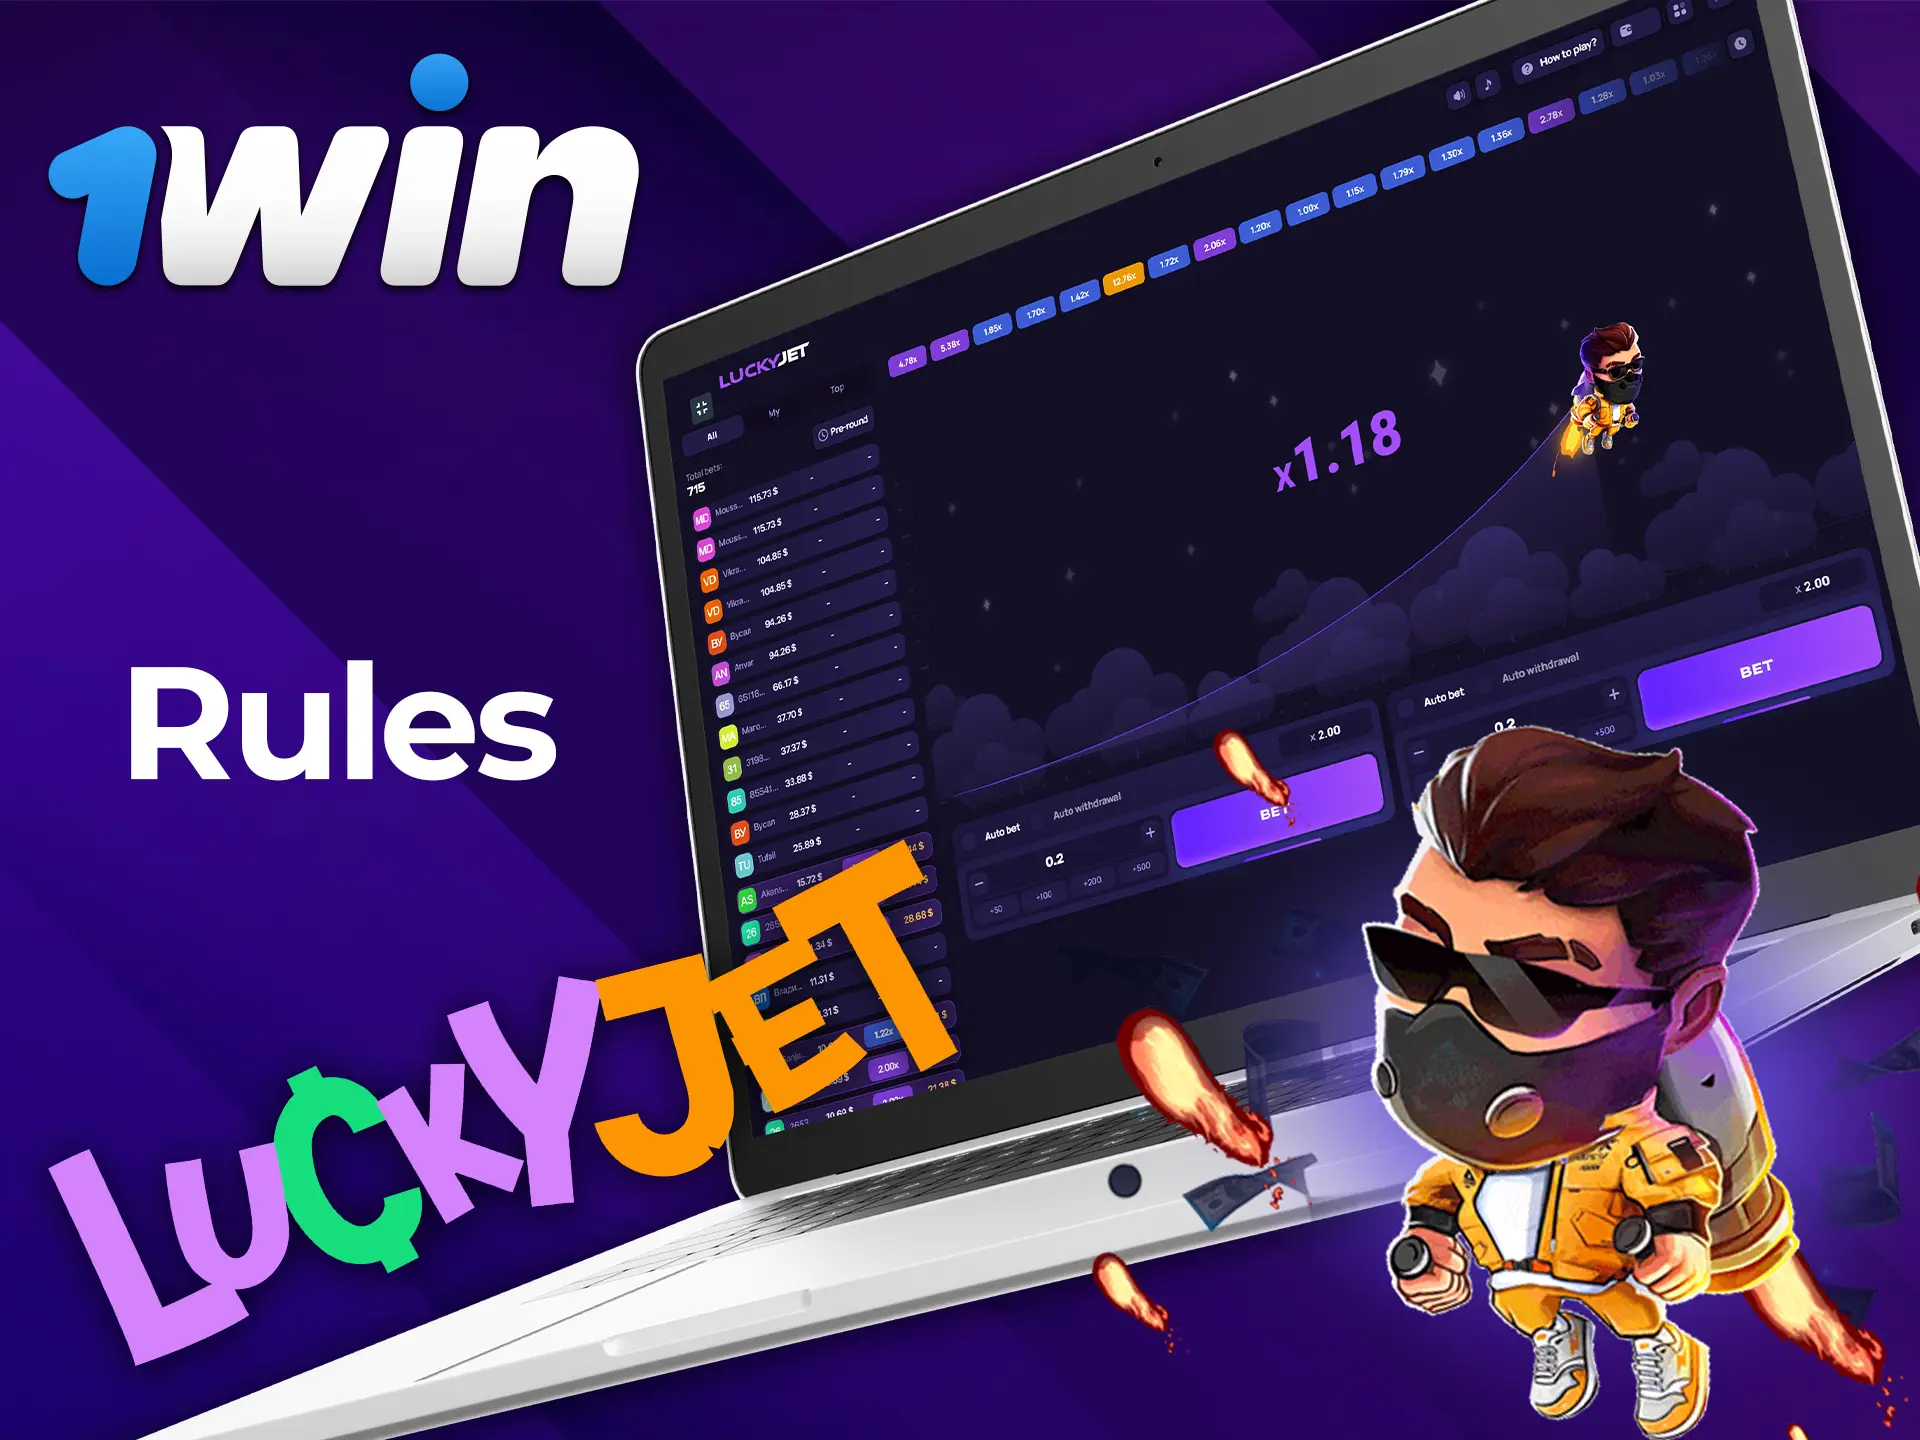 The Lucky Jet 1Win crash game has fairly simple rules.